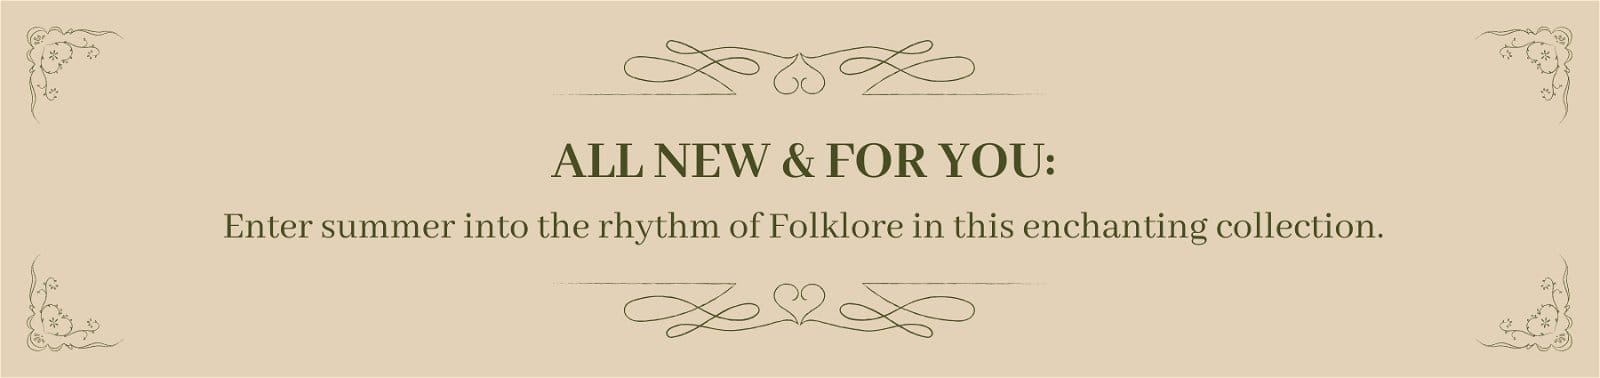 ALL NEW & FOR YOU: Enter summer into the rhythm of Folklore in this enchanting collection.